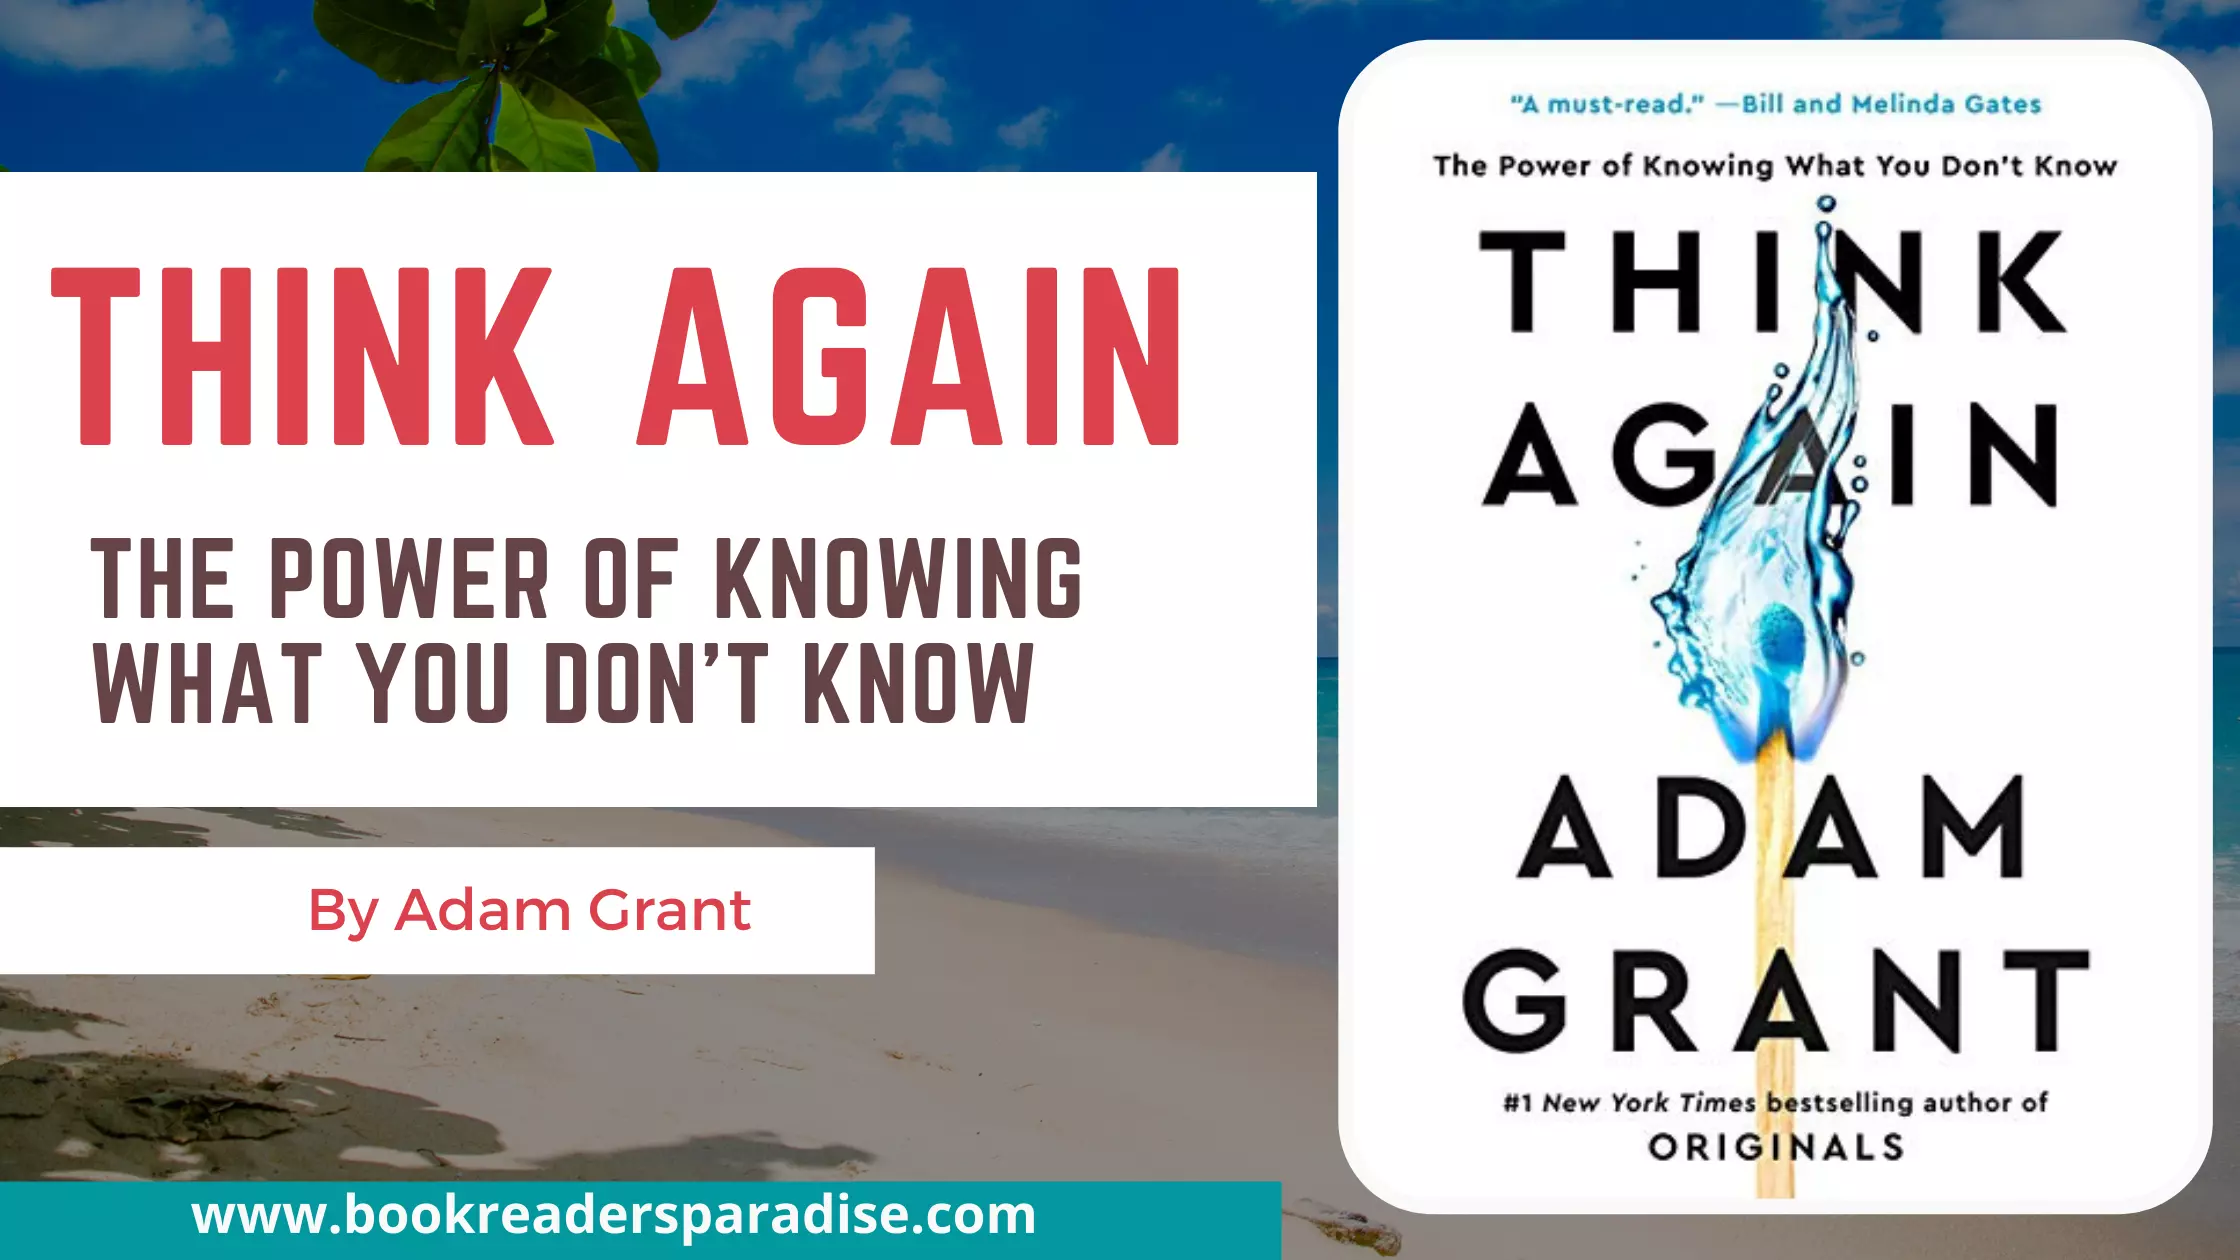 Think Again PDF, Audiobook & Summary By Adam Grant Free Download Details